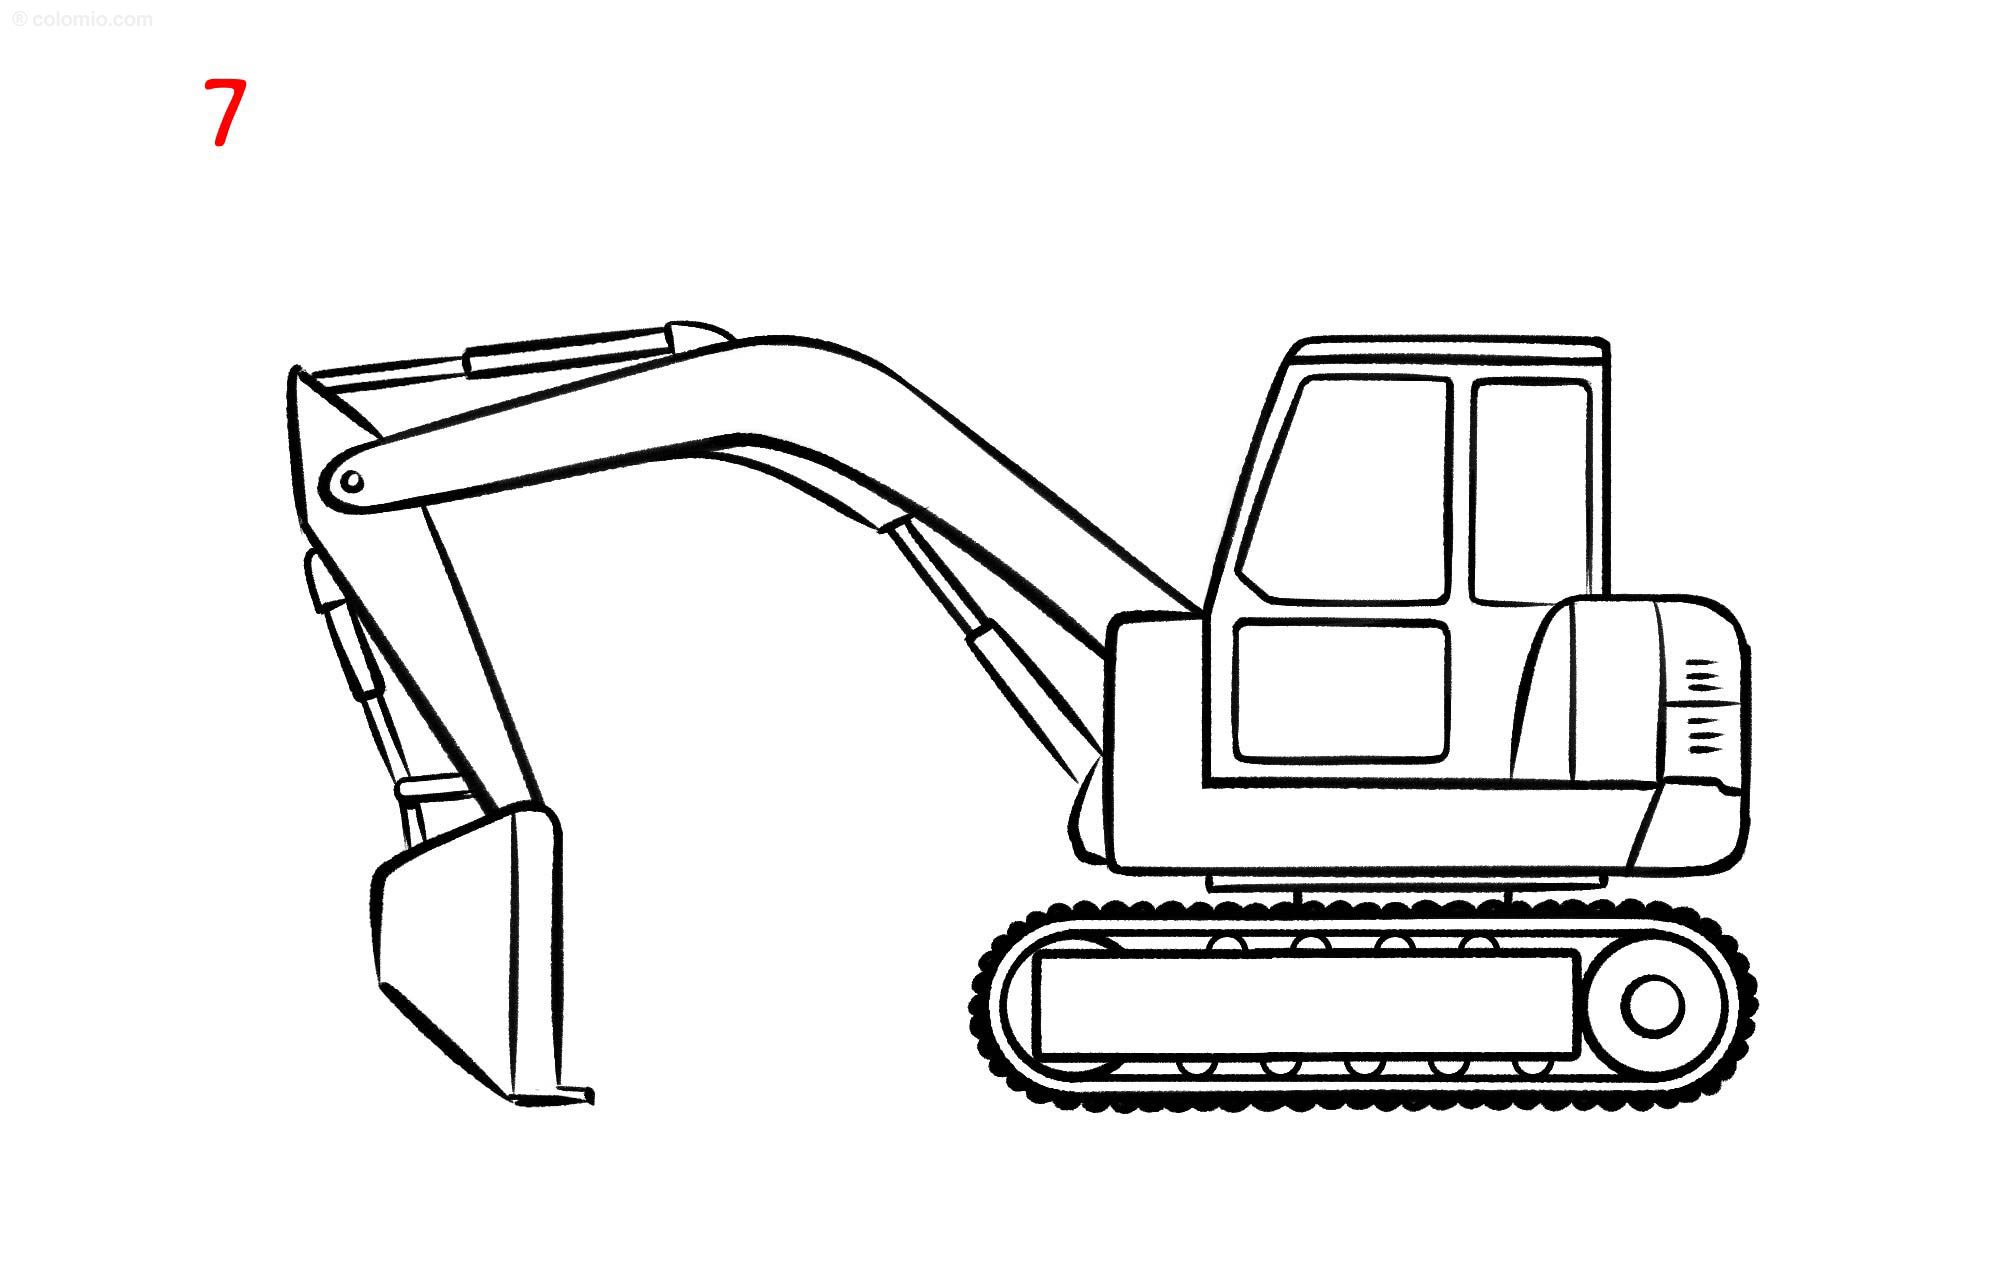 Excavators coloring pages free printable excavator coloring sheets